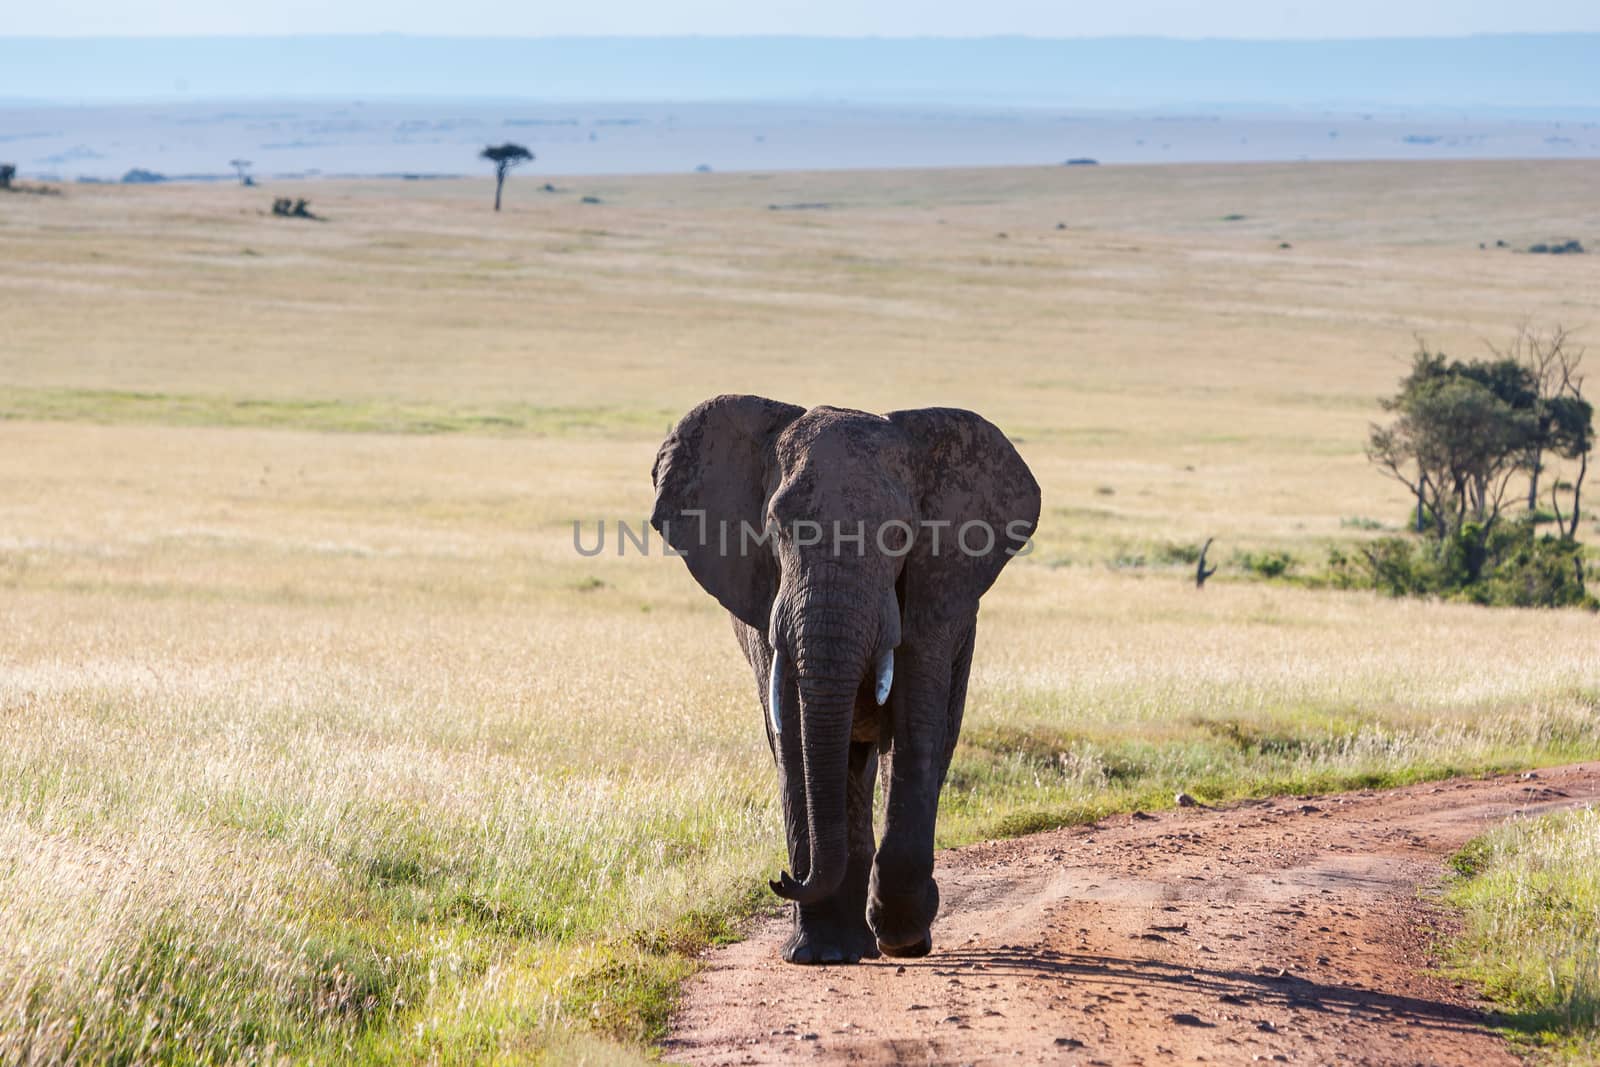 The african elephant walking in the savanna